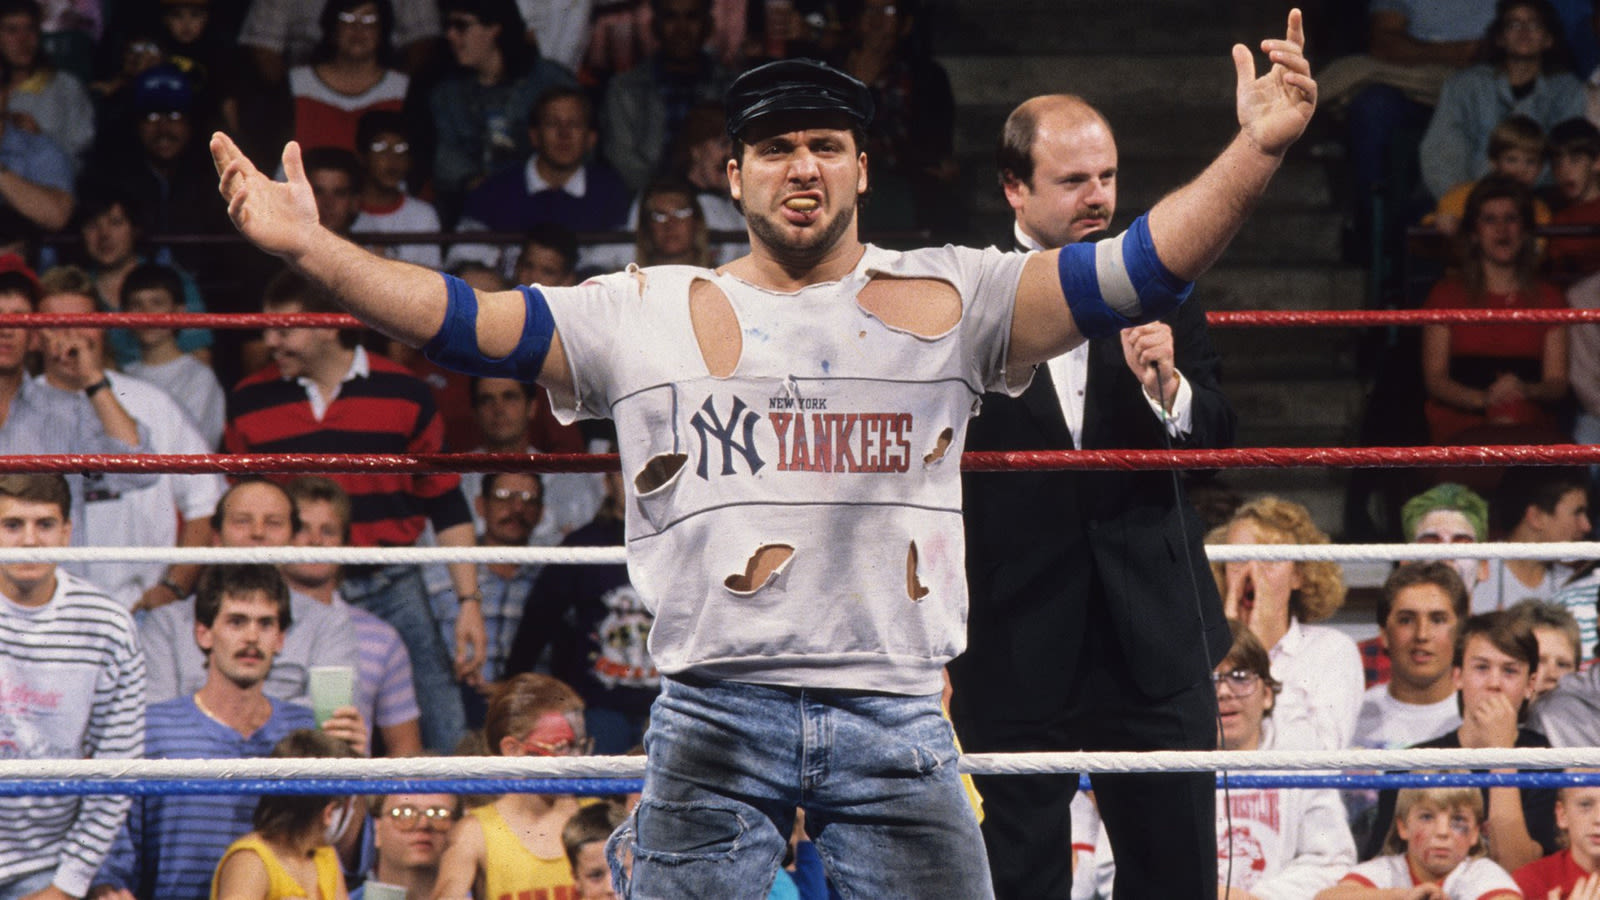 Brooklyn Brawler Comments On Possible WWE Hall Of Fame Induction, His Legacy - Wrestling Inc.